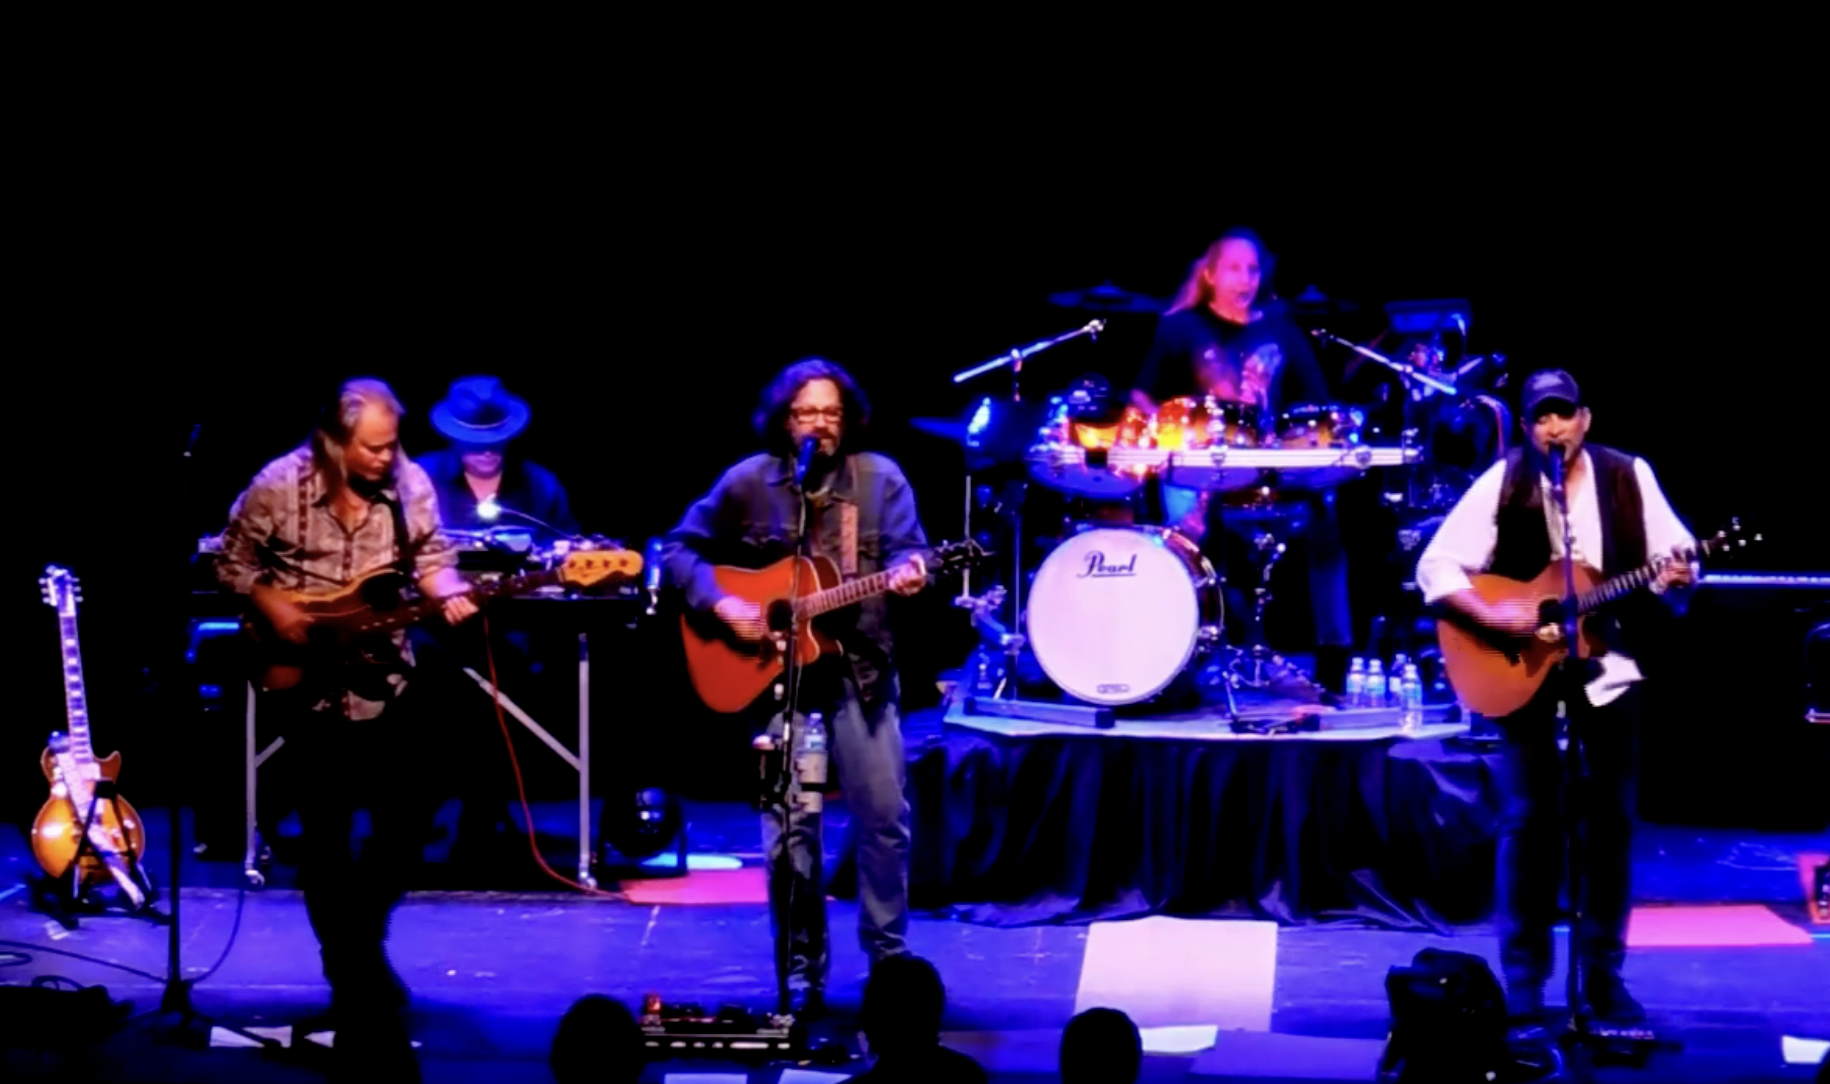 Ticket Alert: Crosby, Stills, Nash & Young Tribute Band is Coming to Tamarac